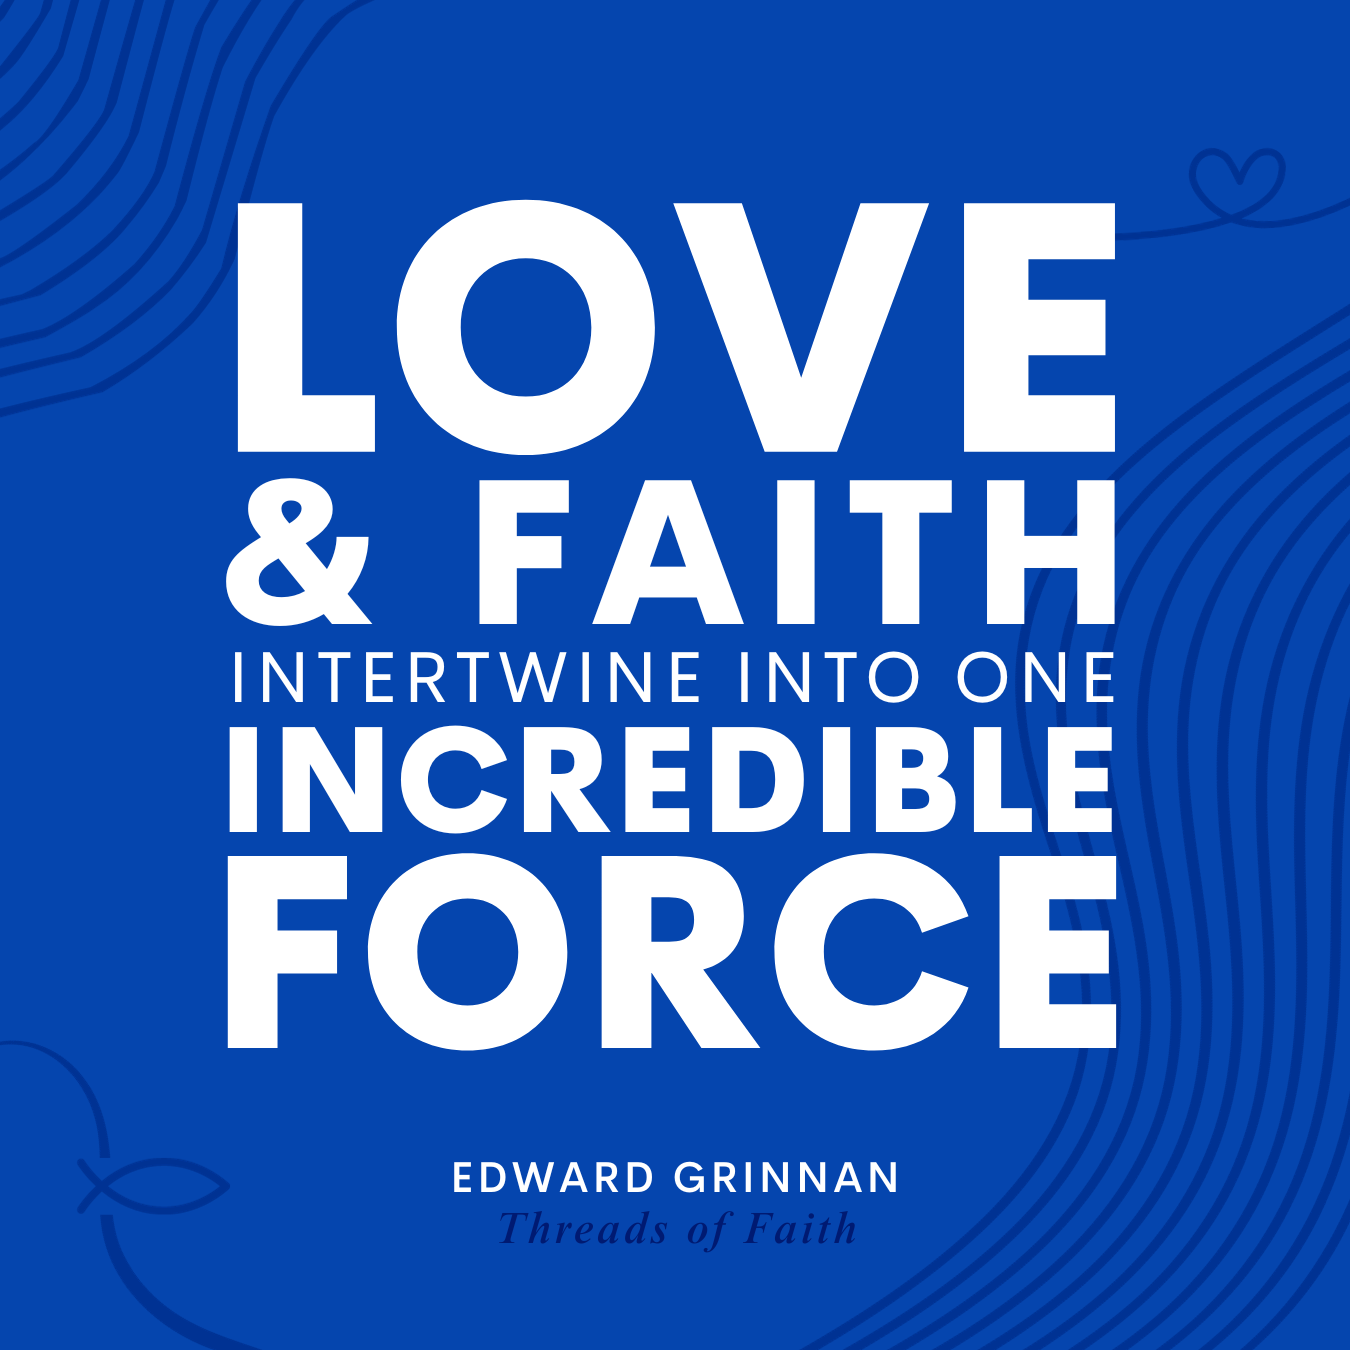 love and faith are a force quote